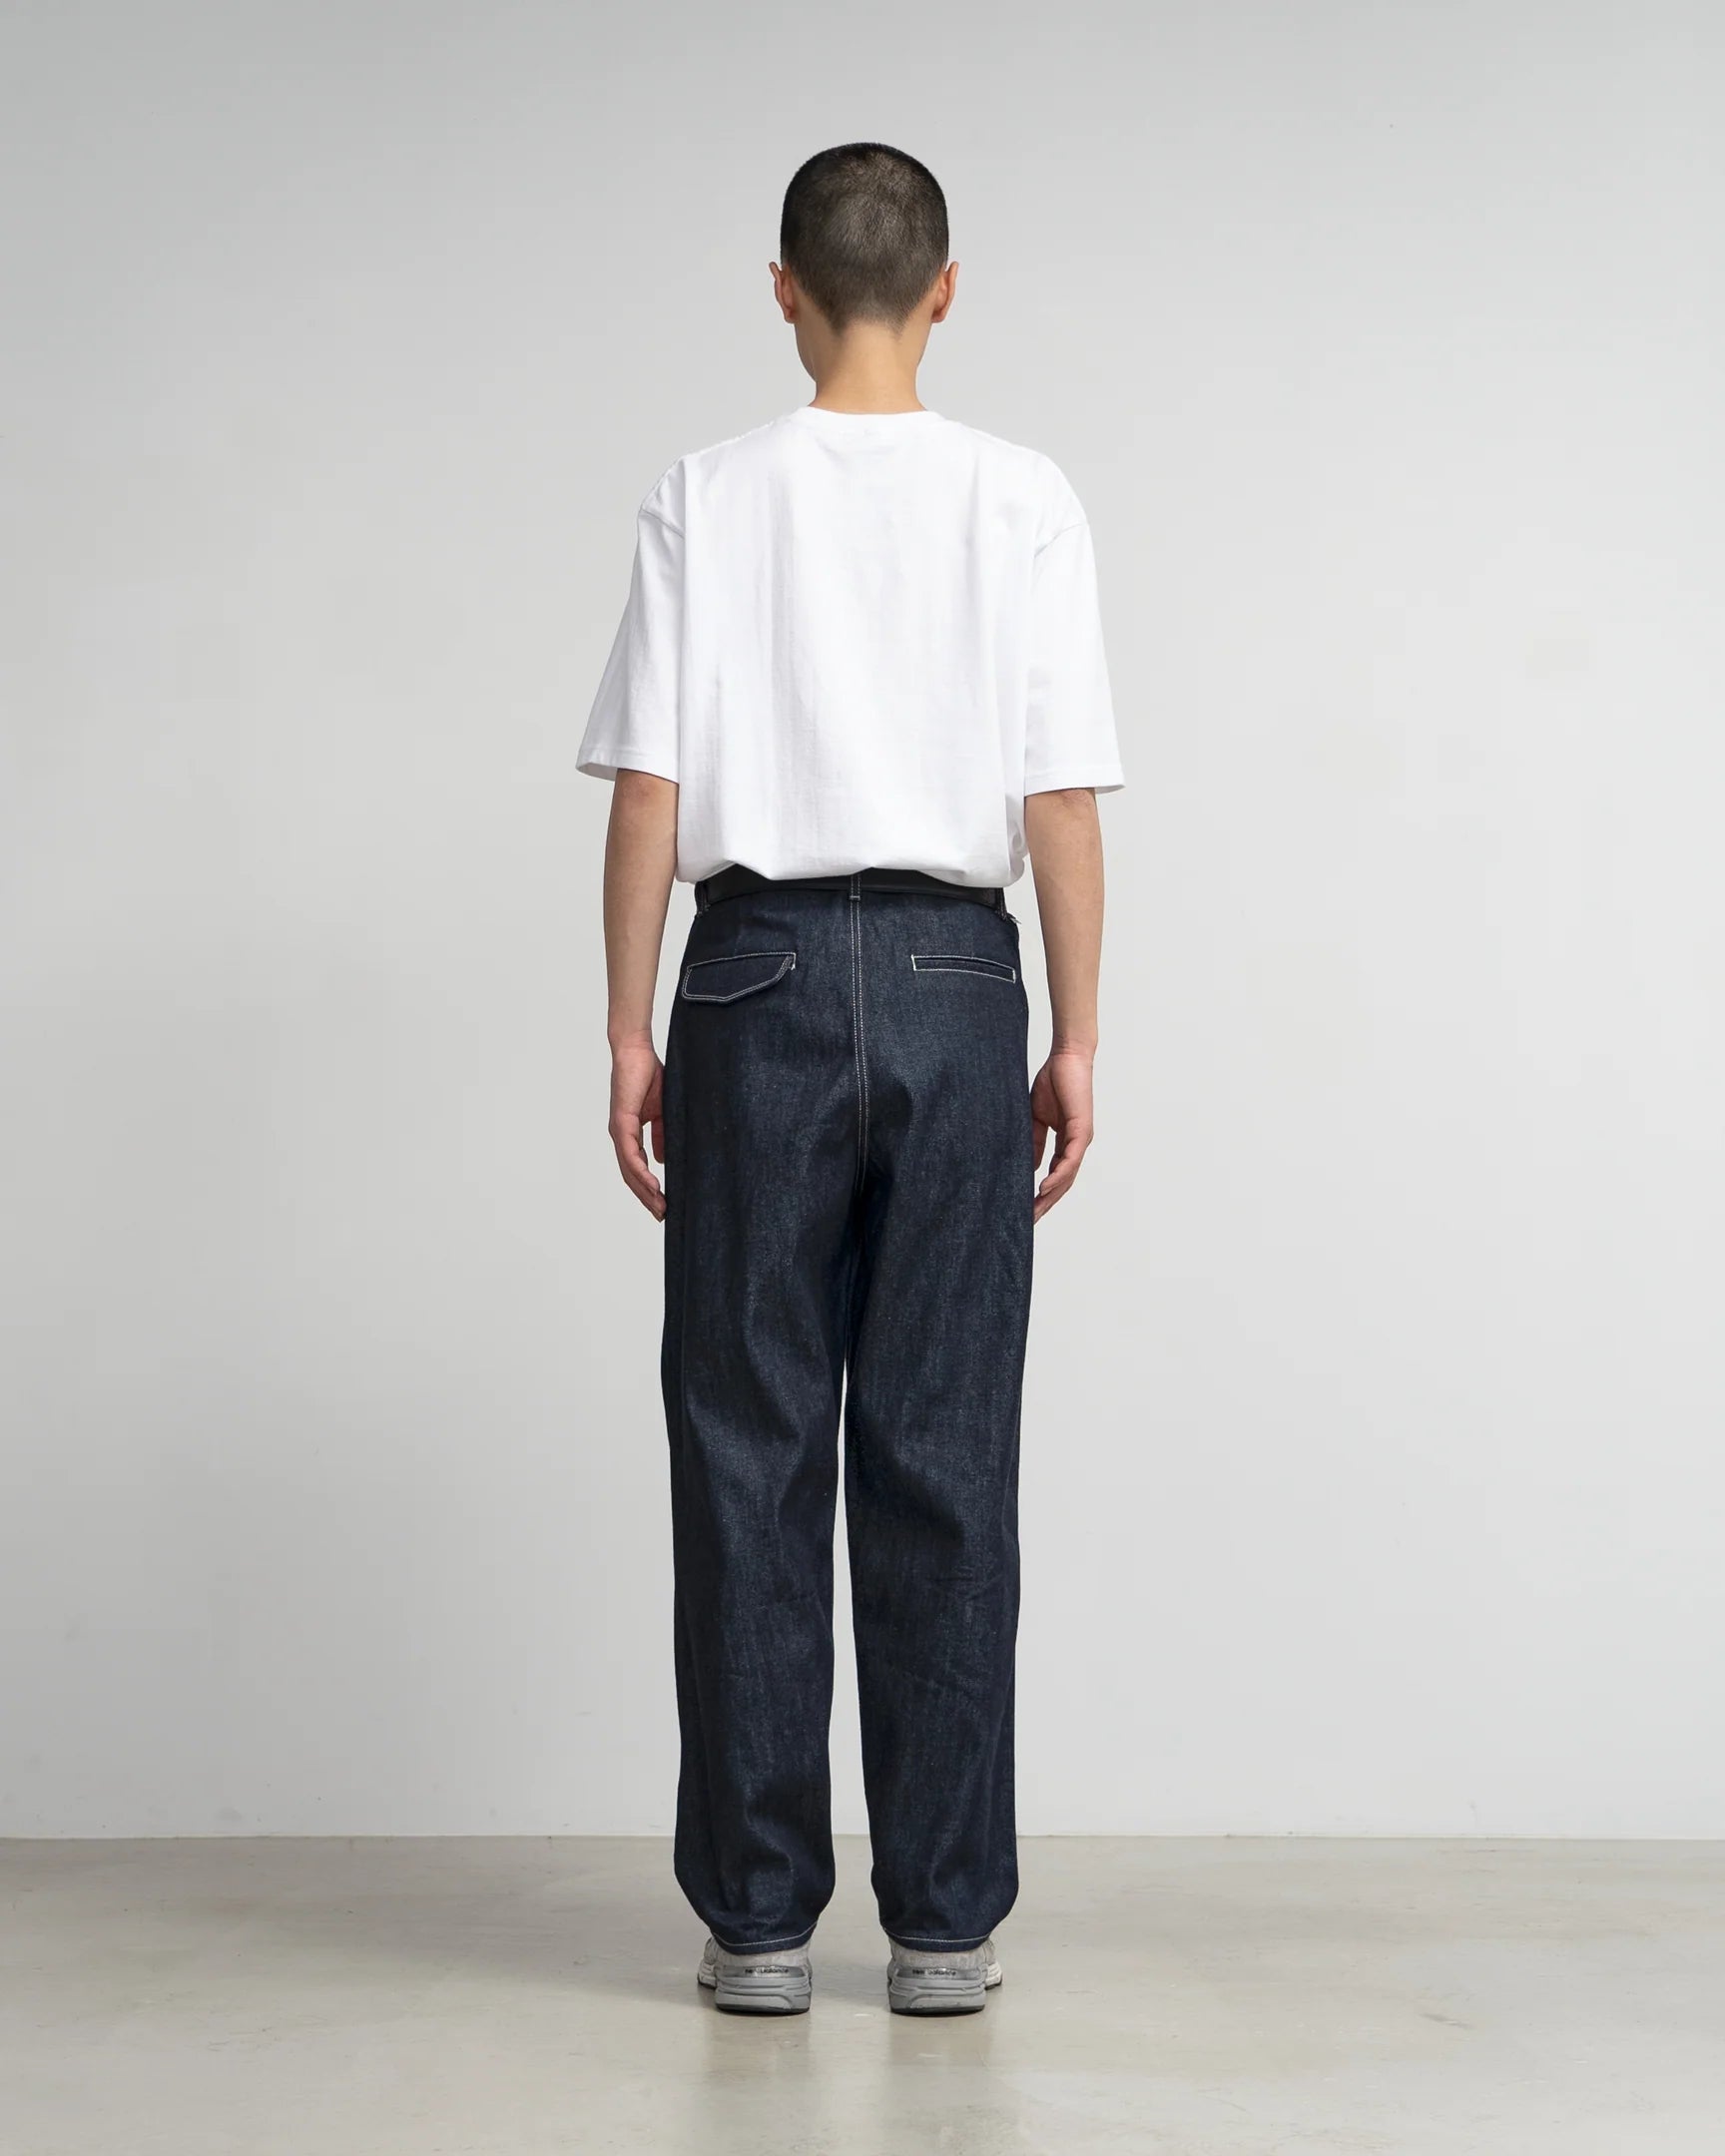 Graphpaper Denim Two Tuck Tapered Pants - パンツ